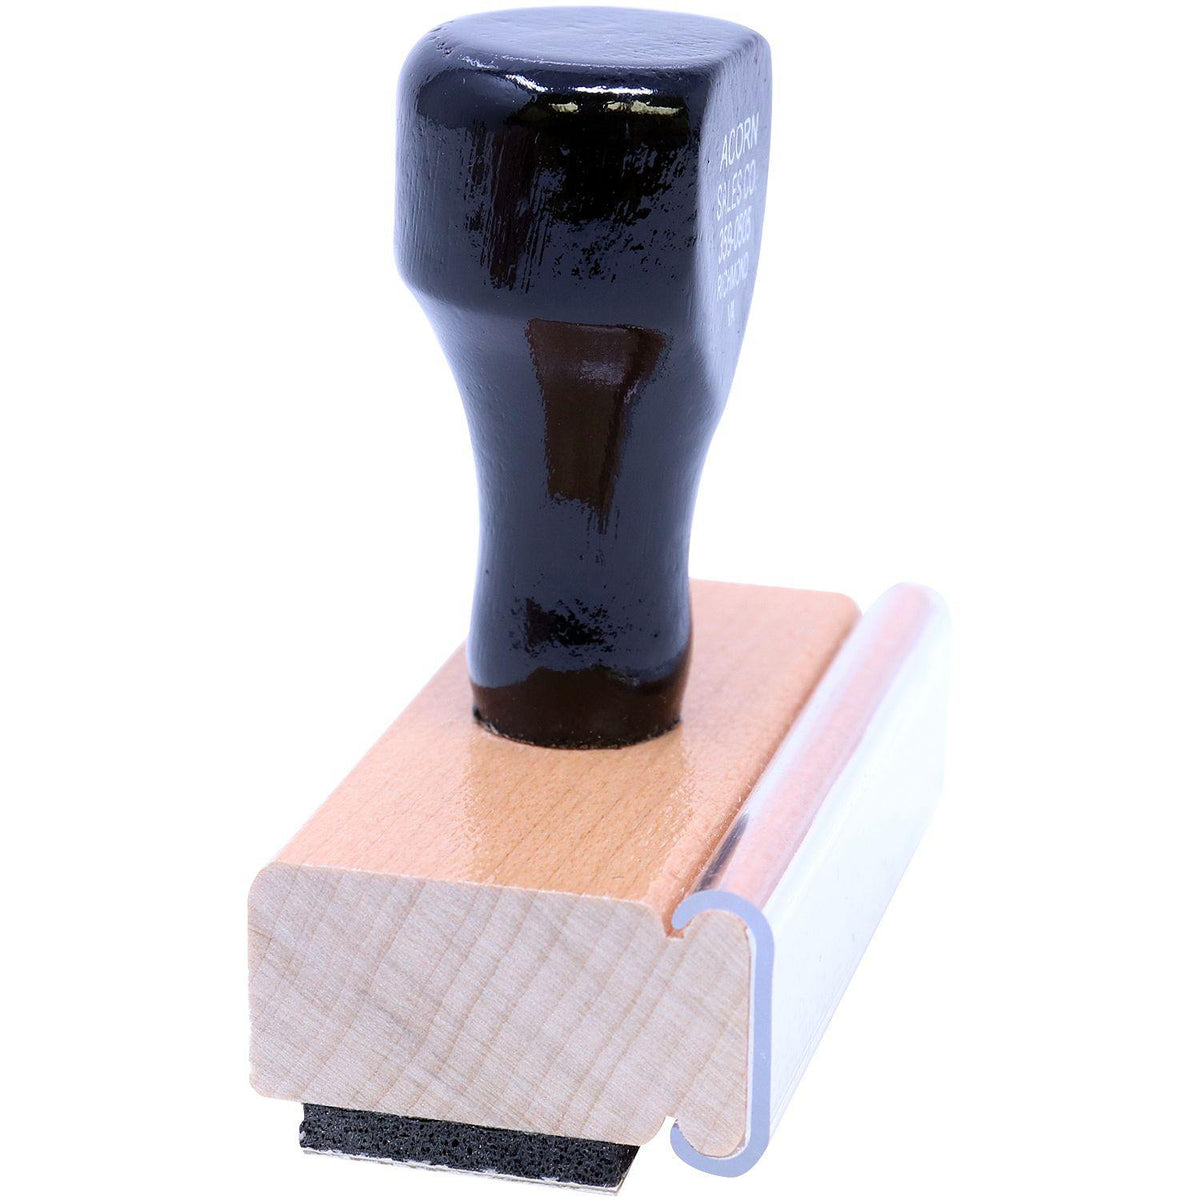 Side View of Large Please Sign Return Rubber Stamp at an Angle